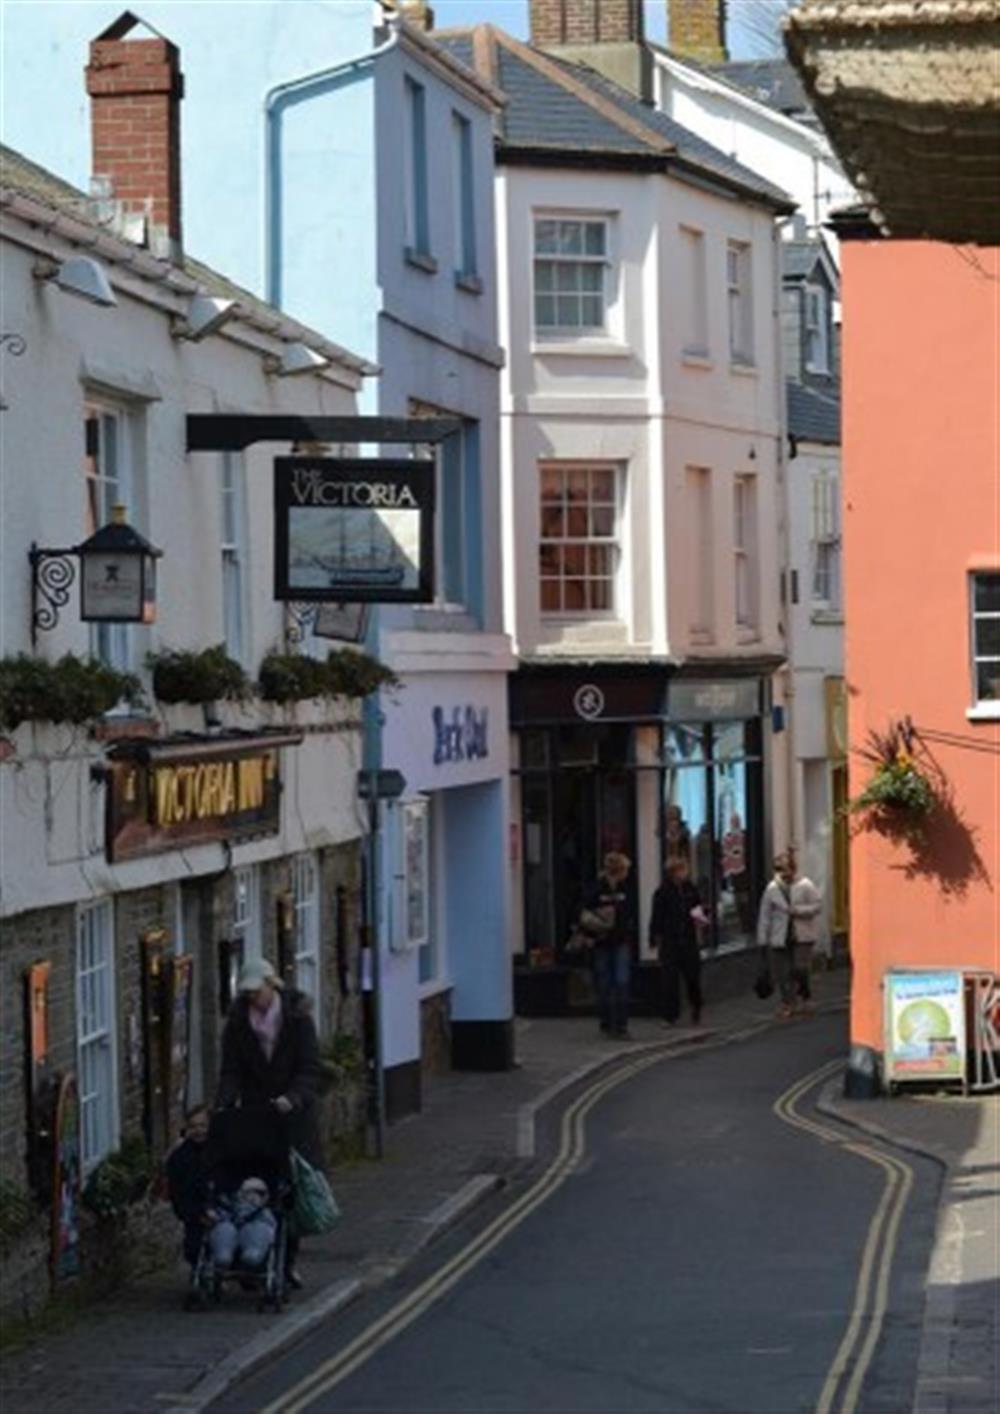 Great pubs, shops and restaurants nearby